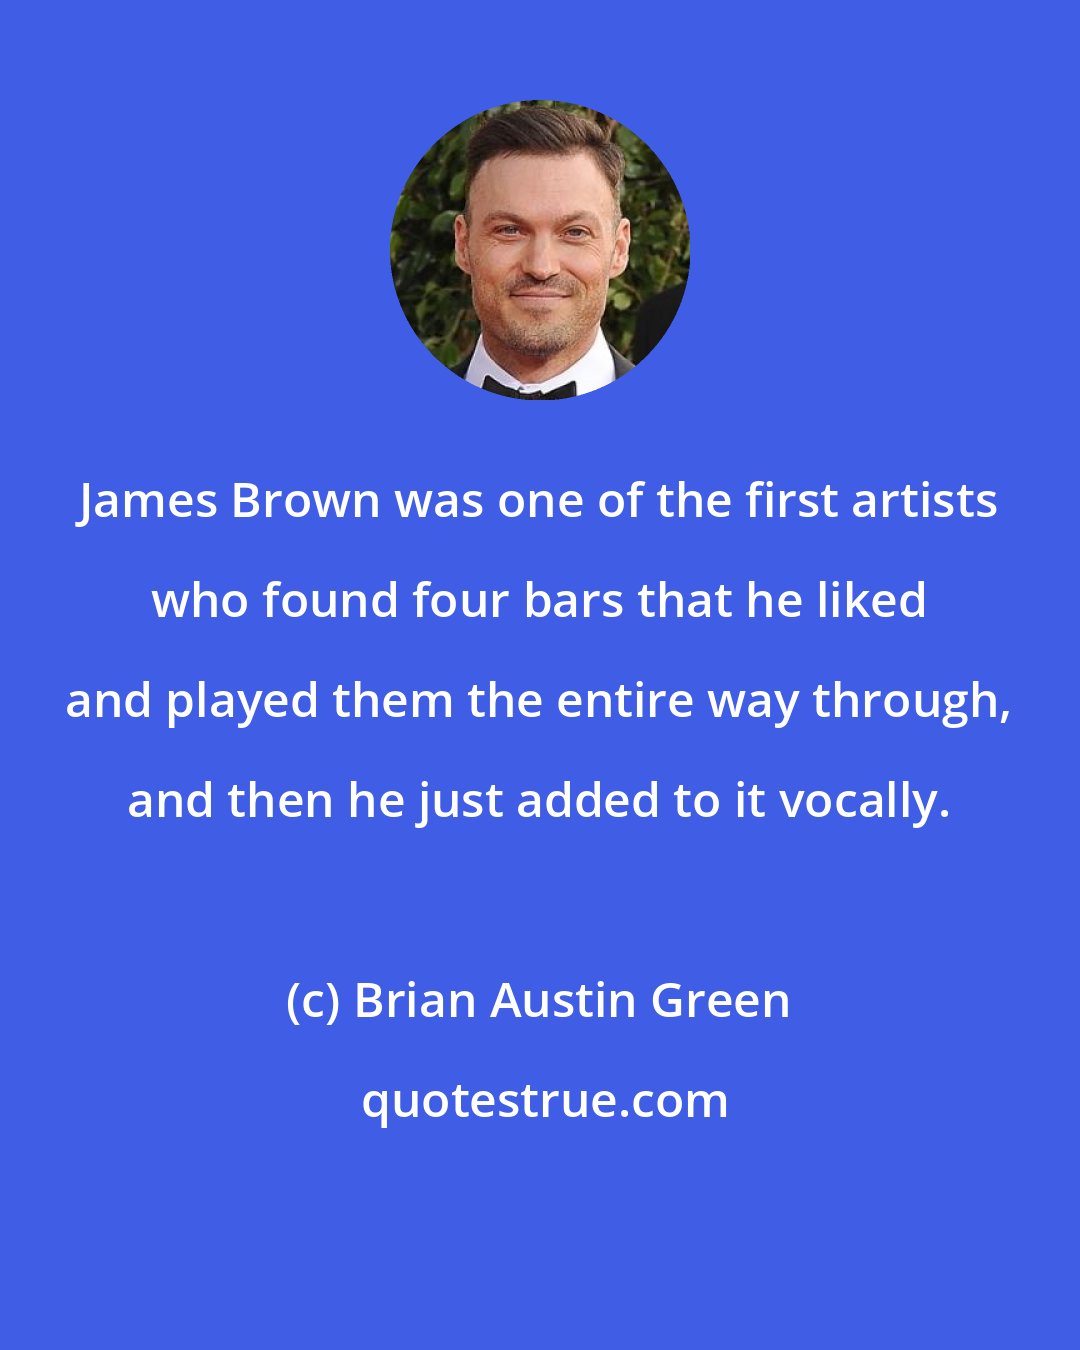 Brian Austin Green: James Brown was one of the first artists who found four bars that he liked and played them the entire way through, and then he just added to it vocally.